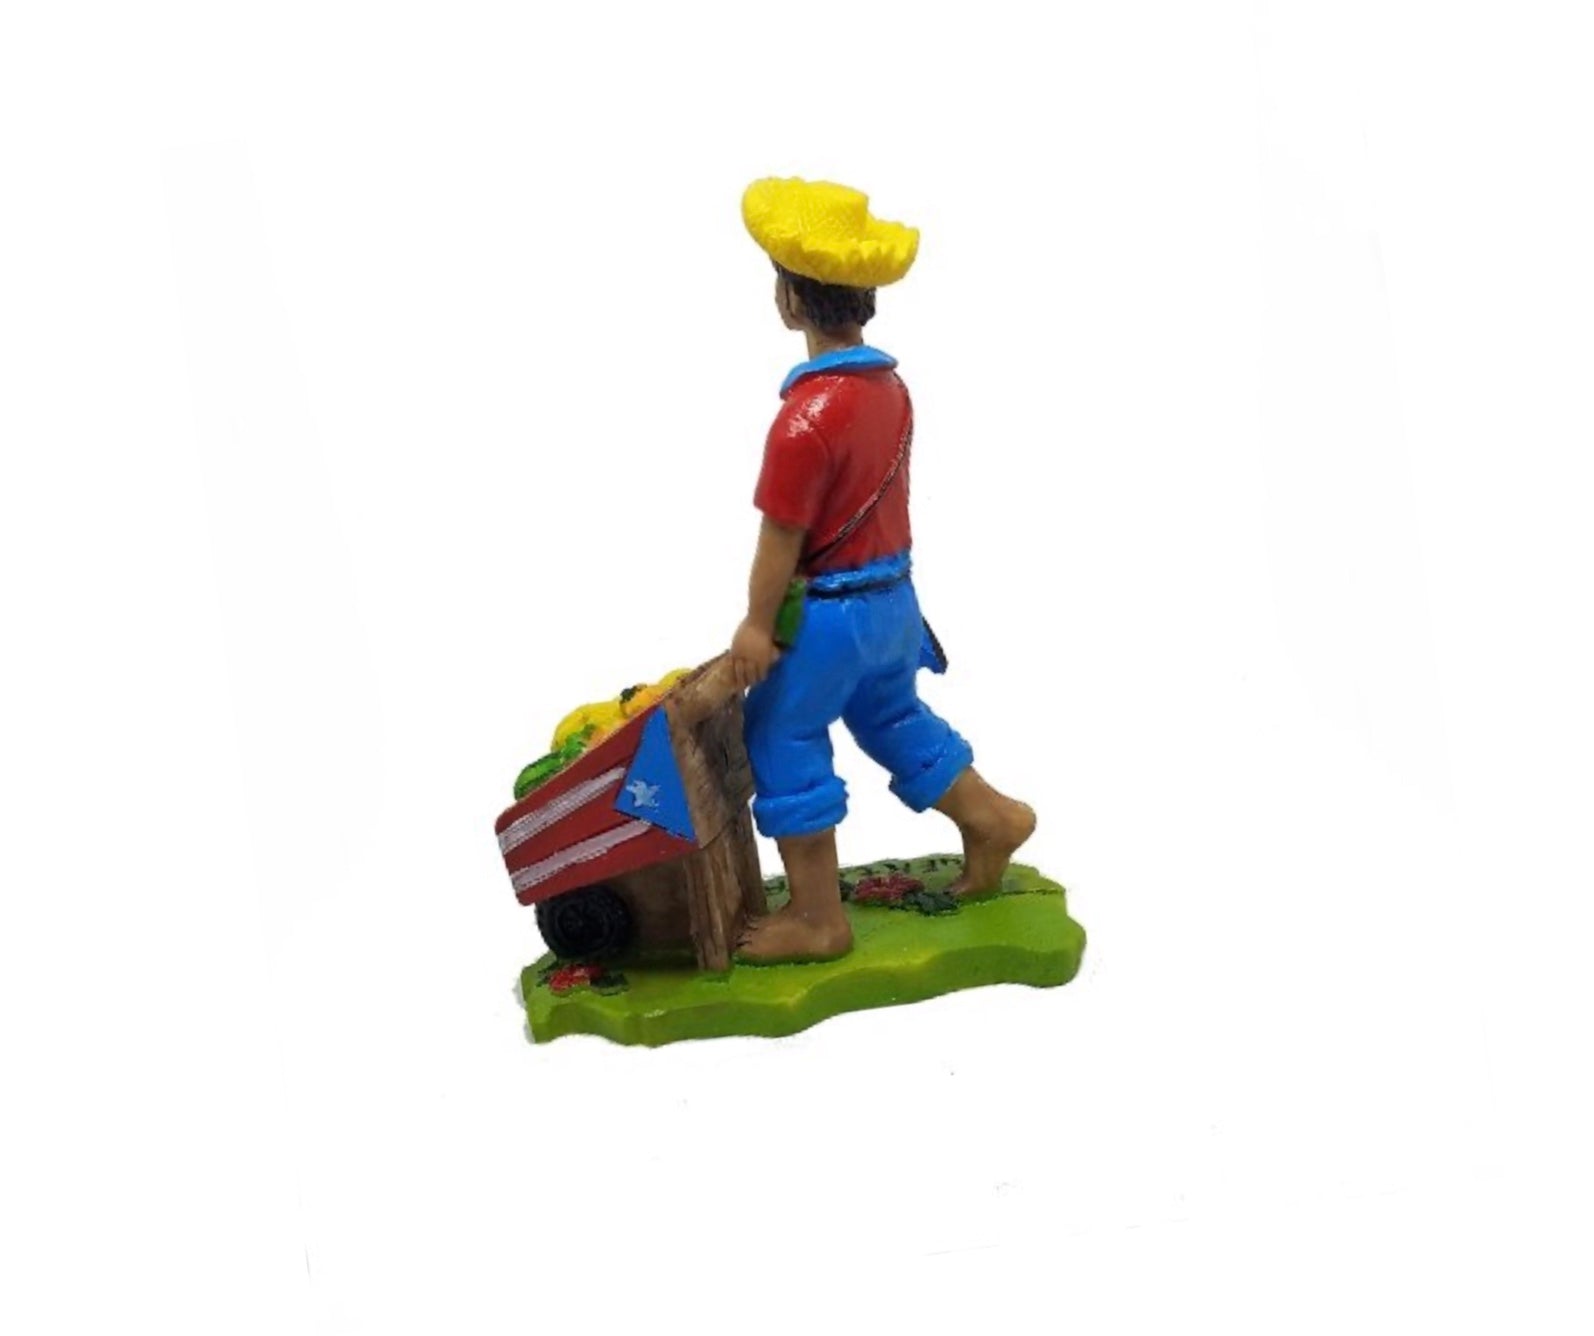 Puerto Rico Jibaro With Fruits Figures 4" Inches